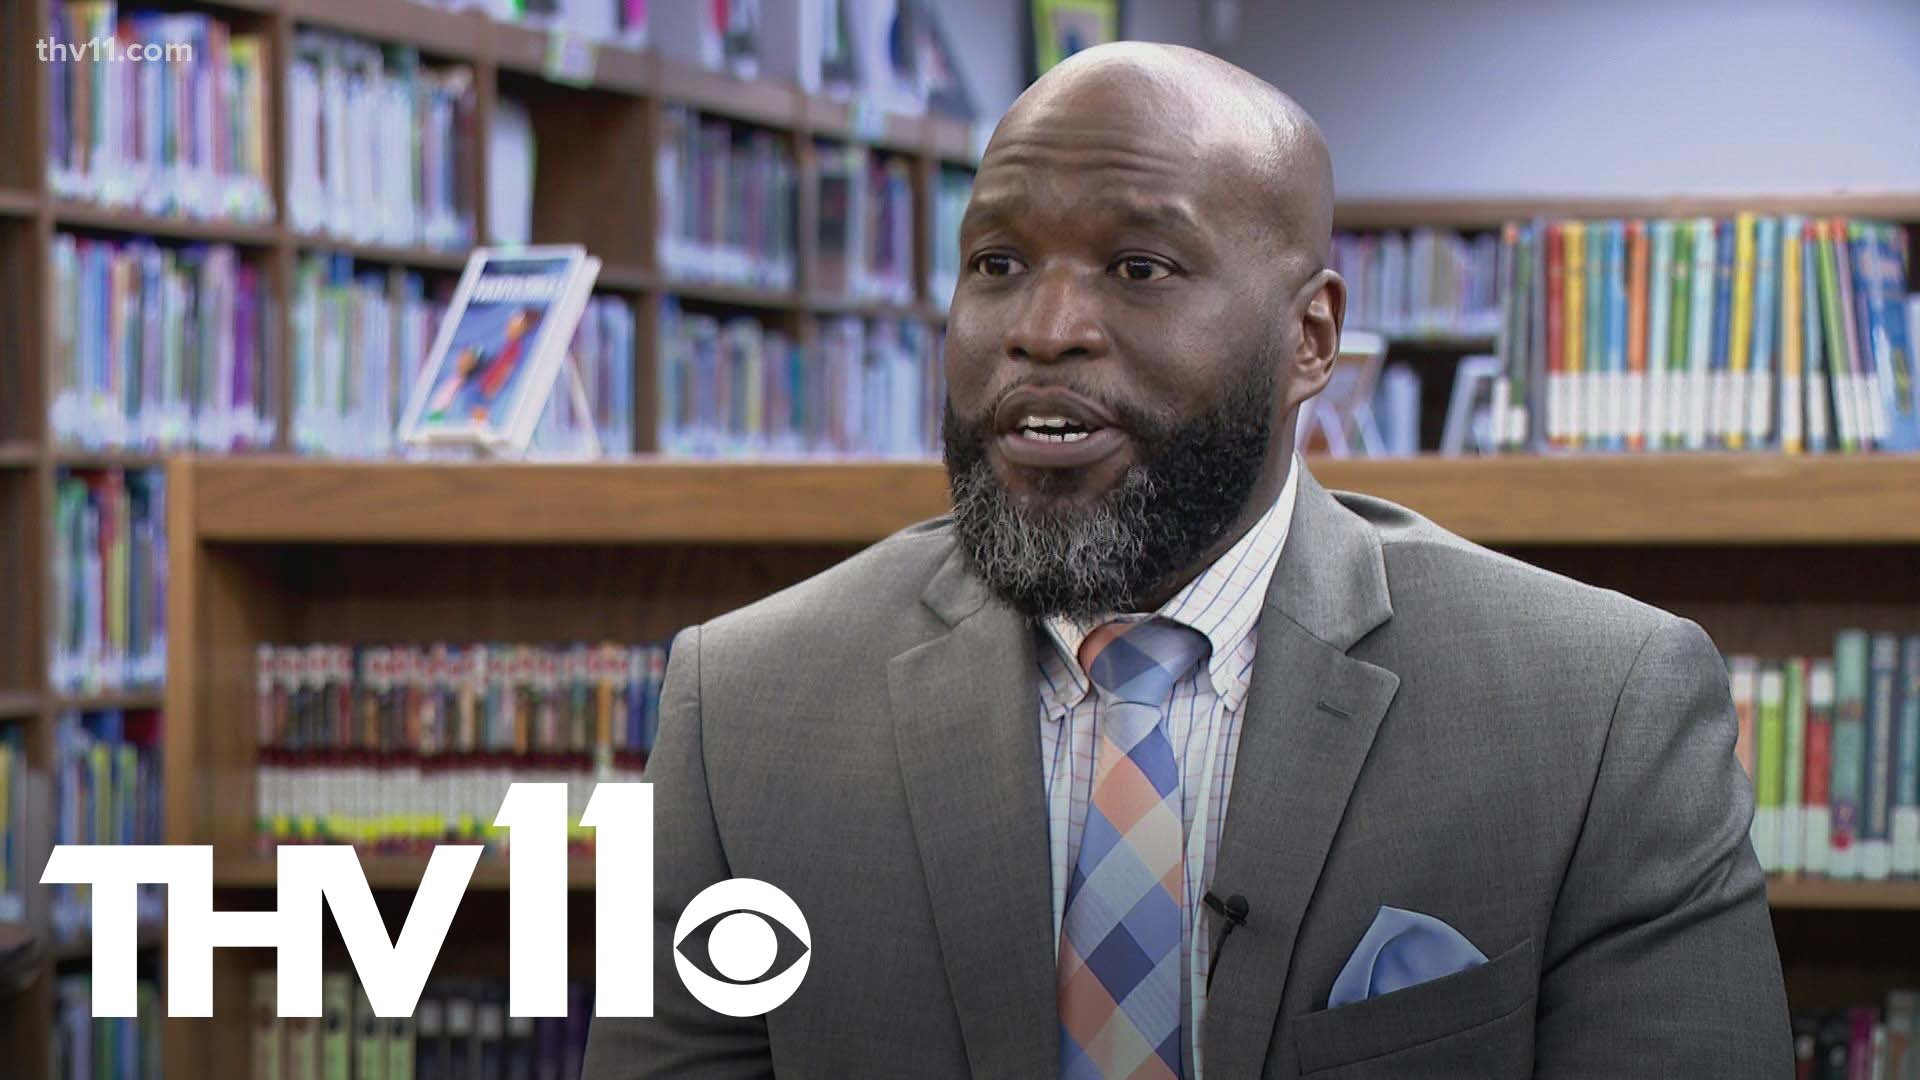 With the school year coming to an end, current LRSD superintendent Michael Poore is preparing to retire as new superintendent Dr. Jermall Wright preps to take over.